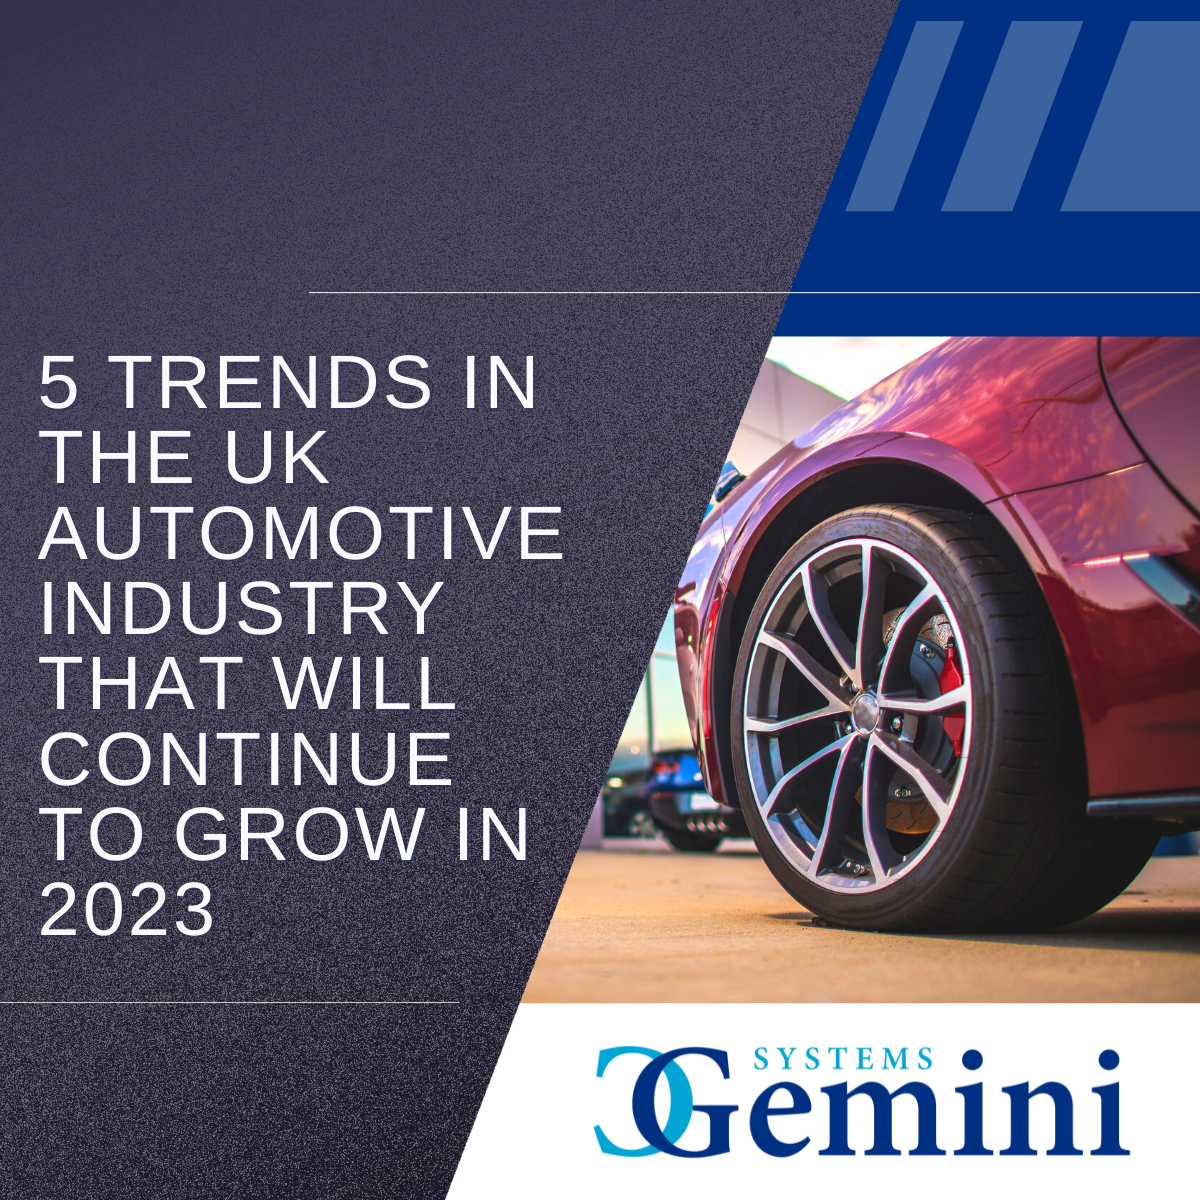 5 trends in the UK Automotive Industry that will continue to grow in 2023